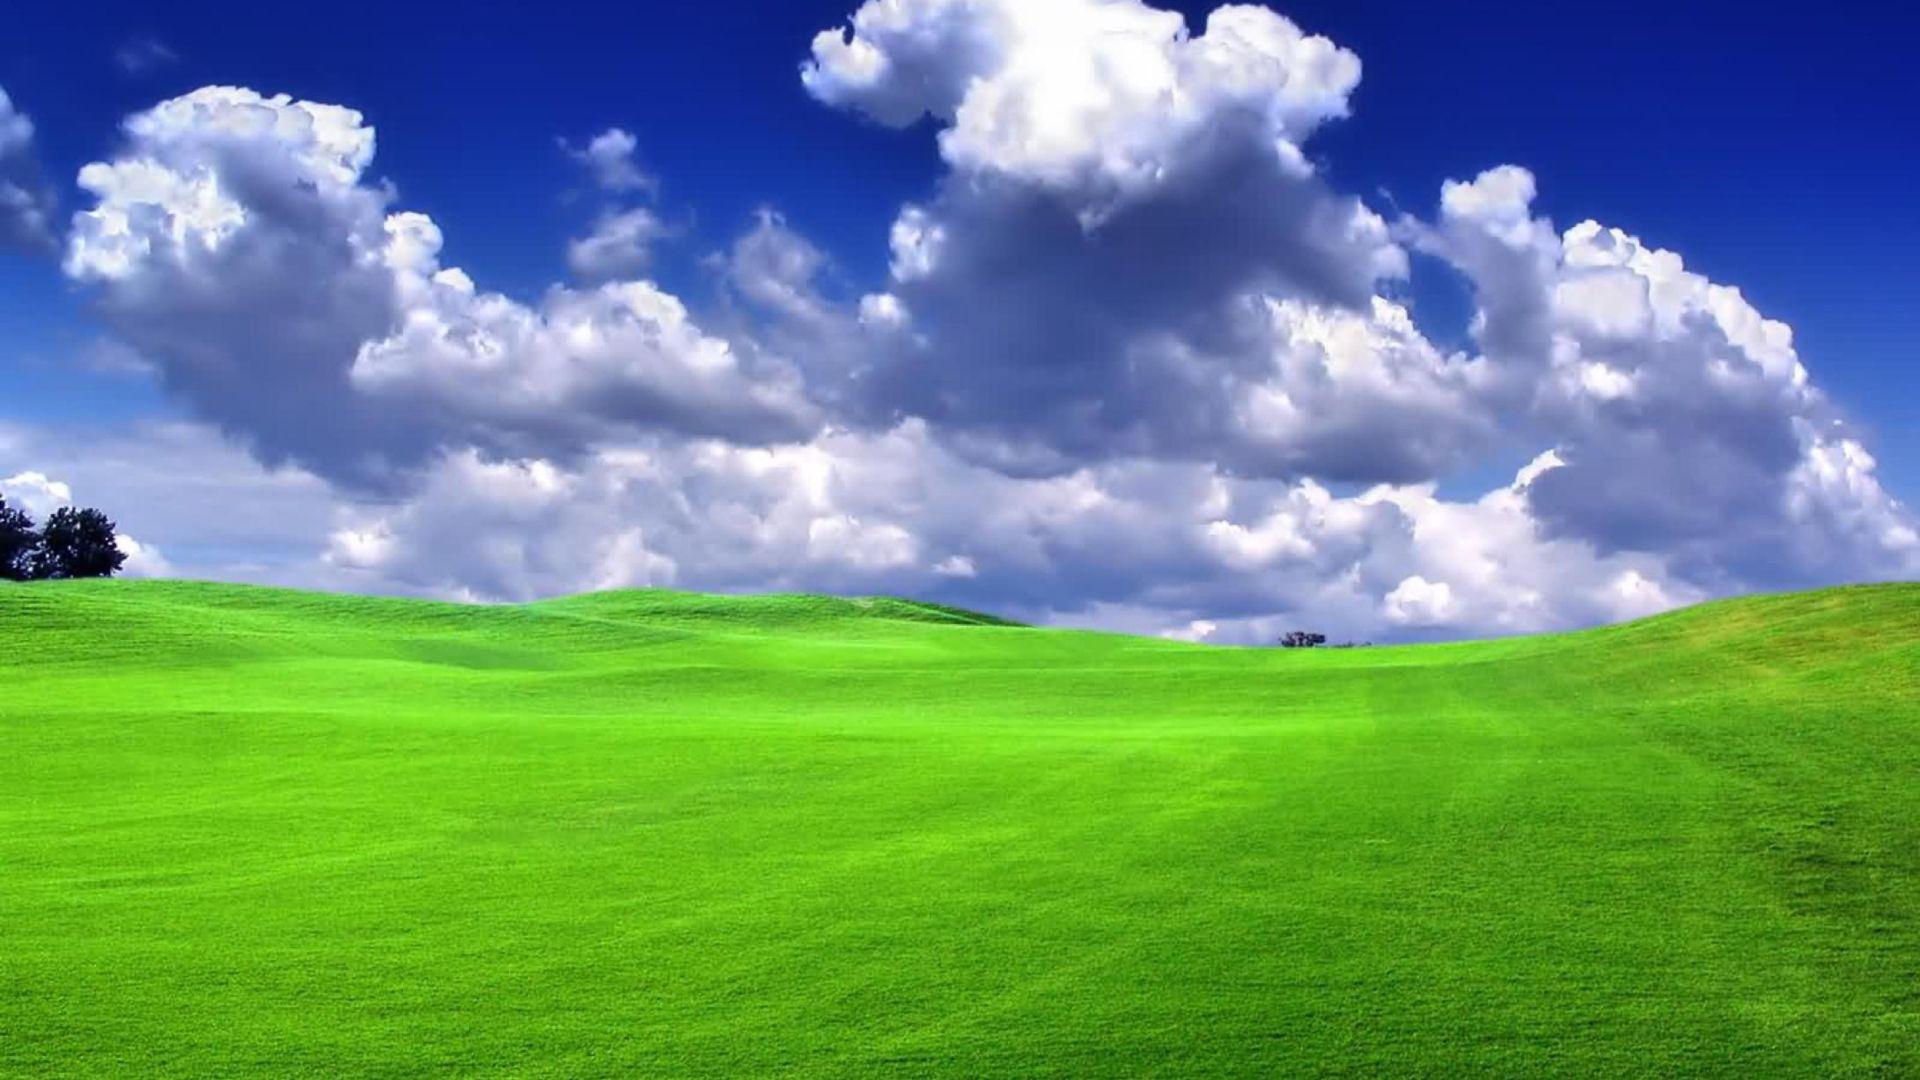 Guide to find Windows xp desktop backgrounds location the easy way